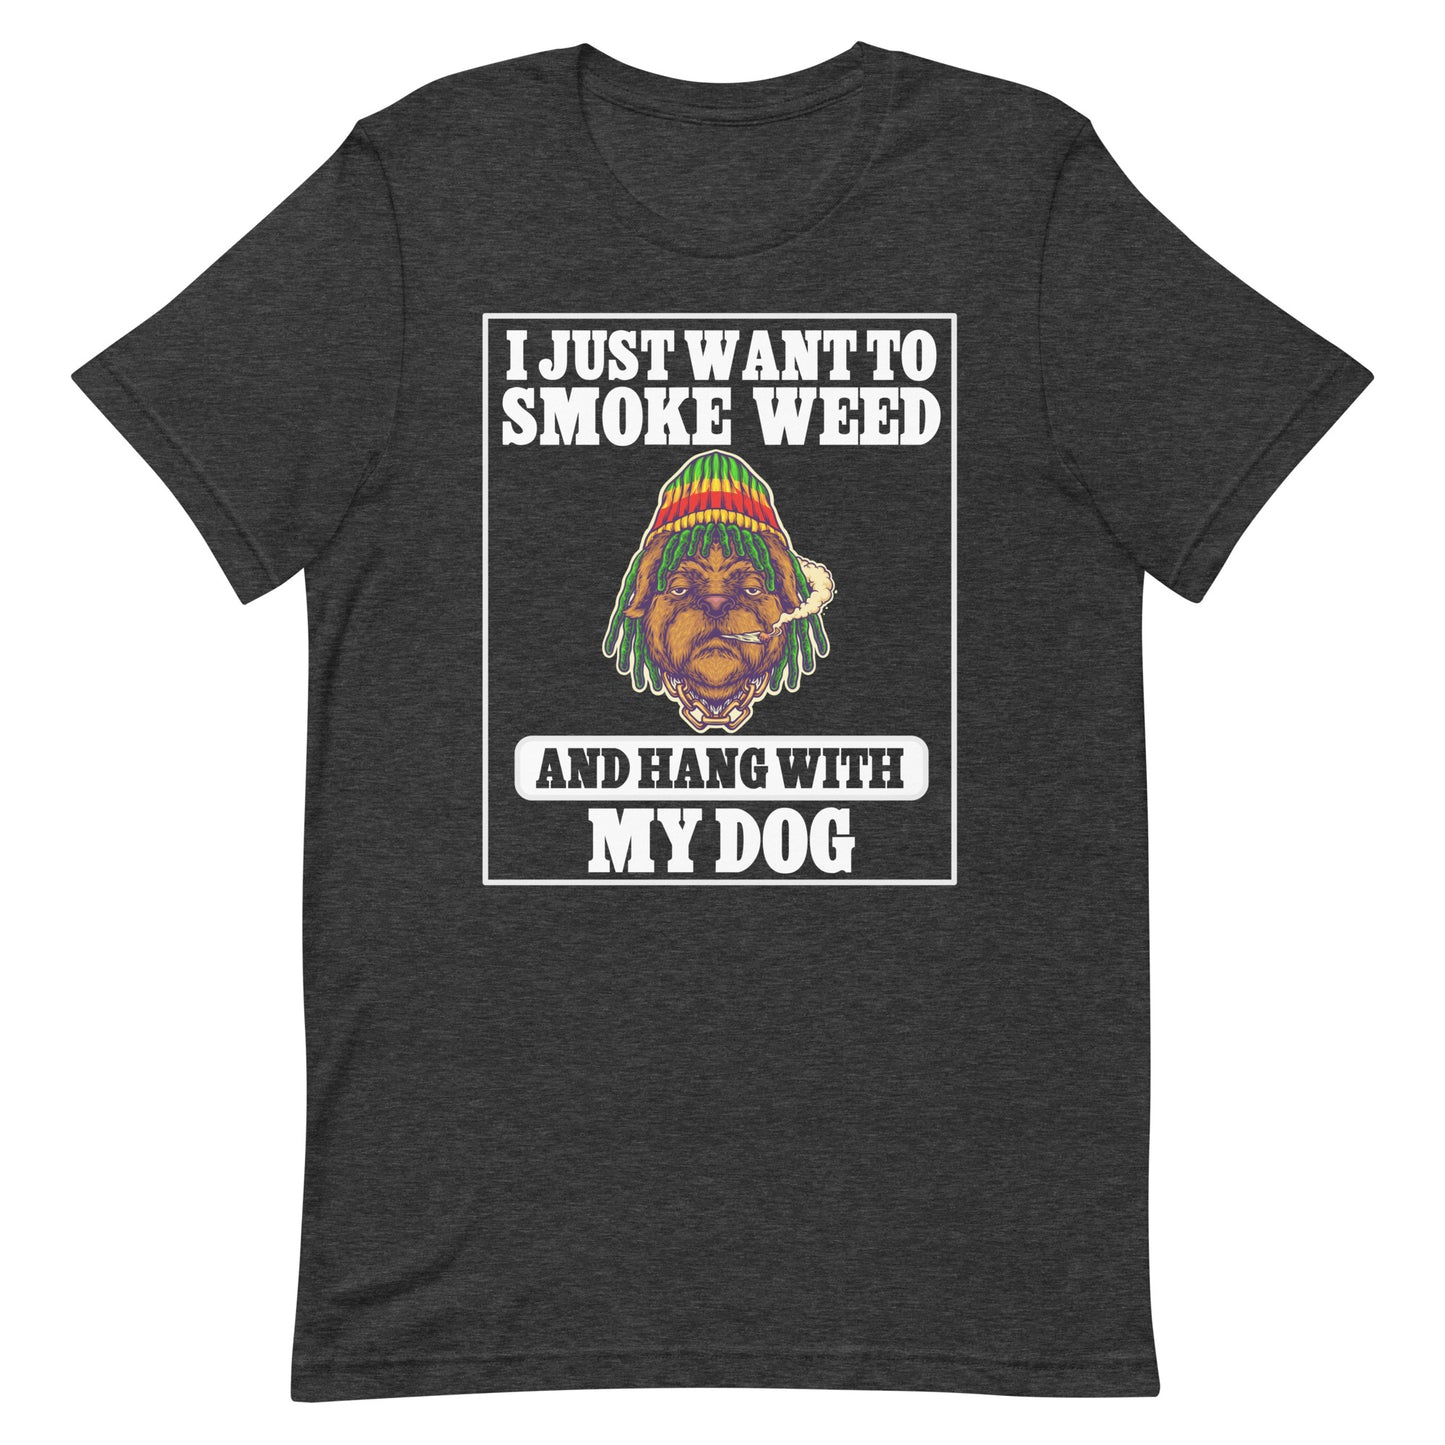 I Just Want Smoke and Hang With My Dog T-Shirt